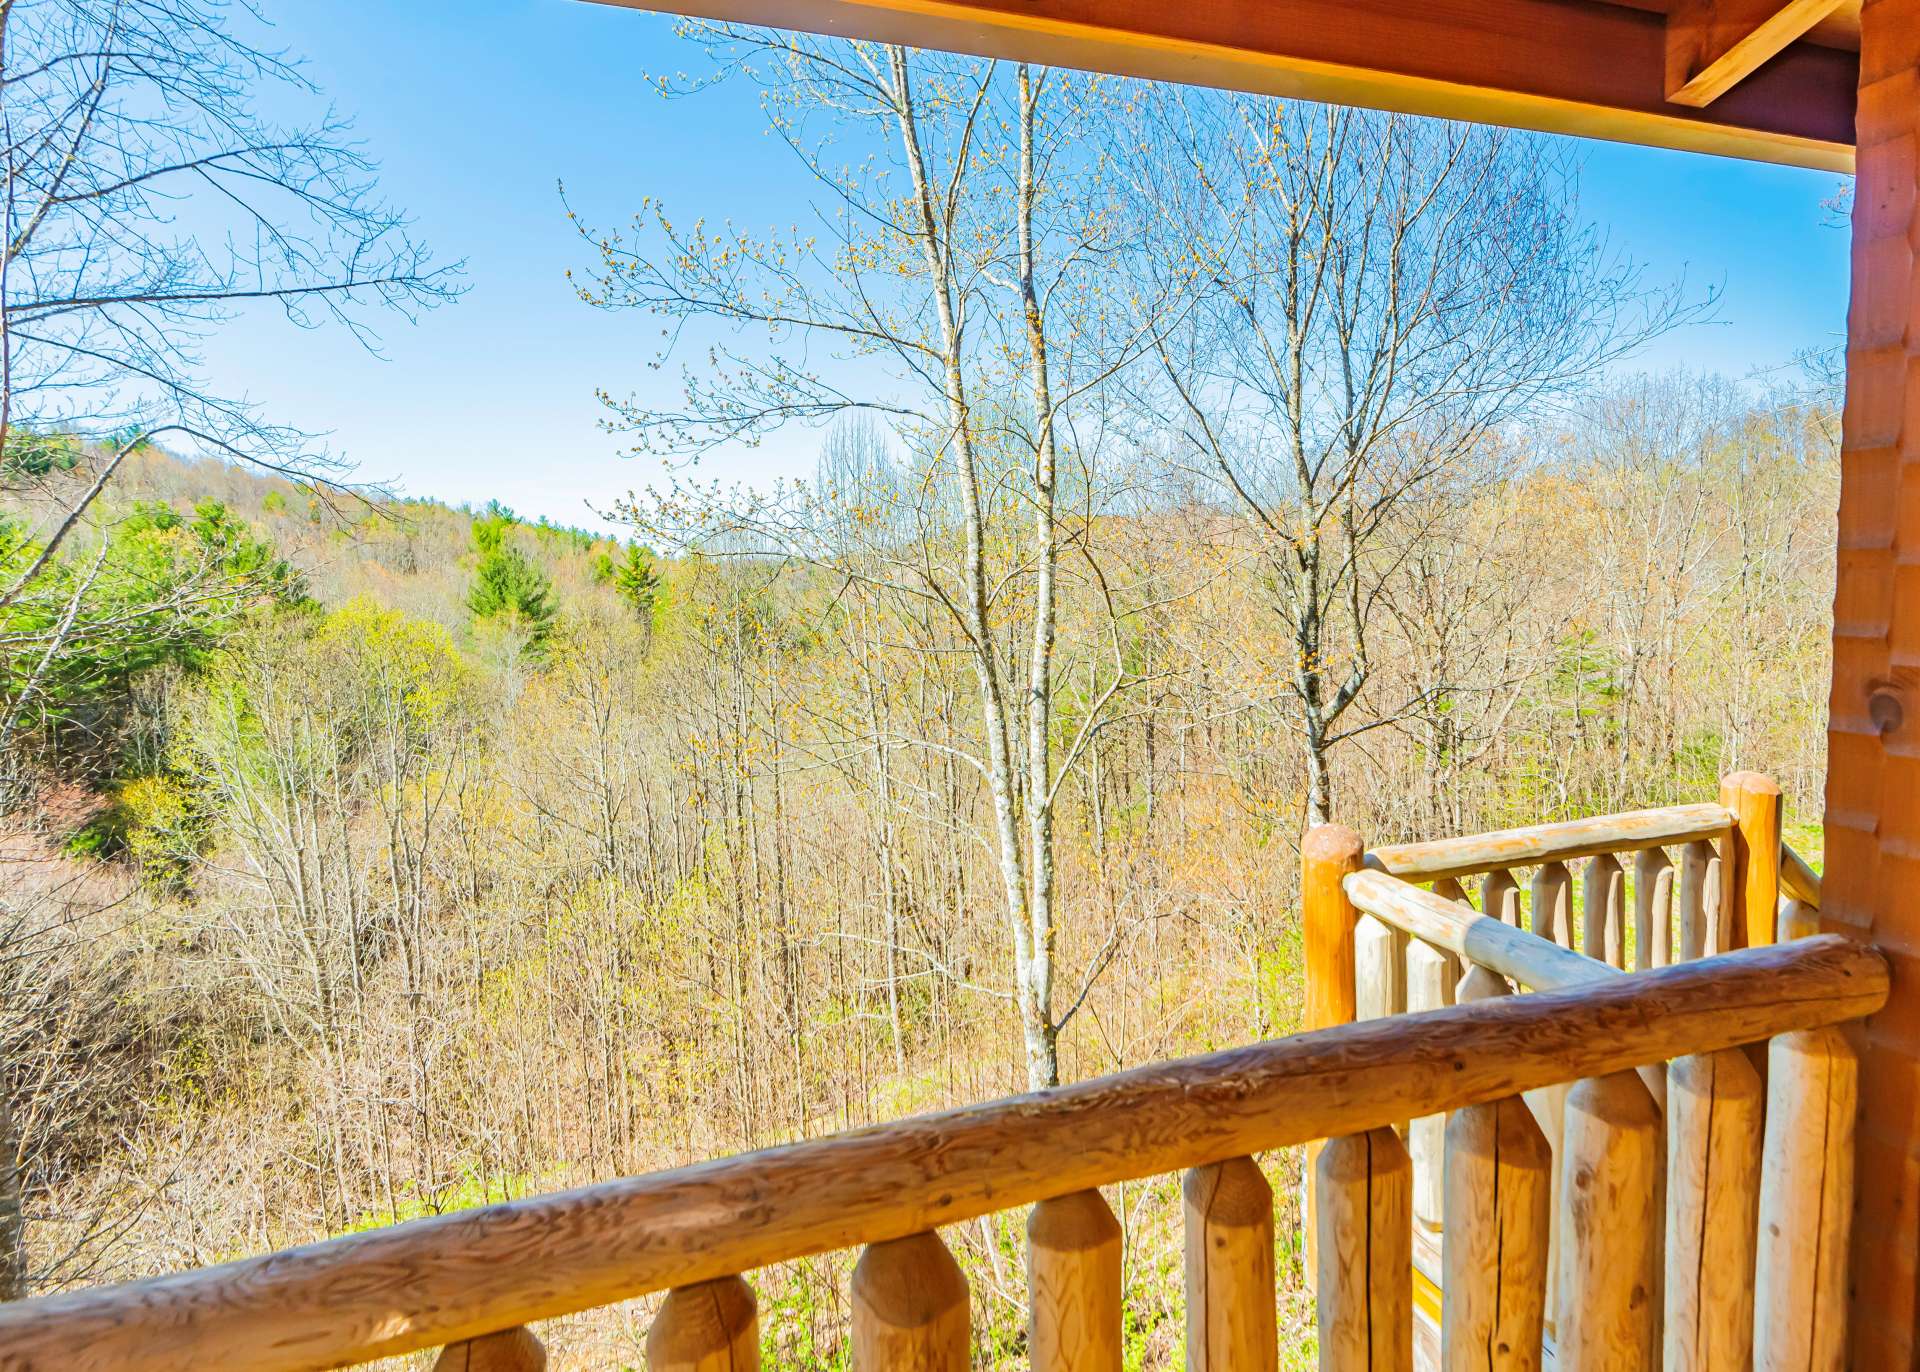 You can almost feel the mountain breezes and hear the sounds of songbirds.  This is what you are looking for in a mountain retreat.